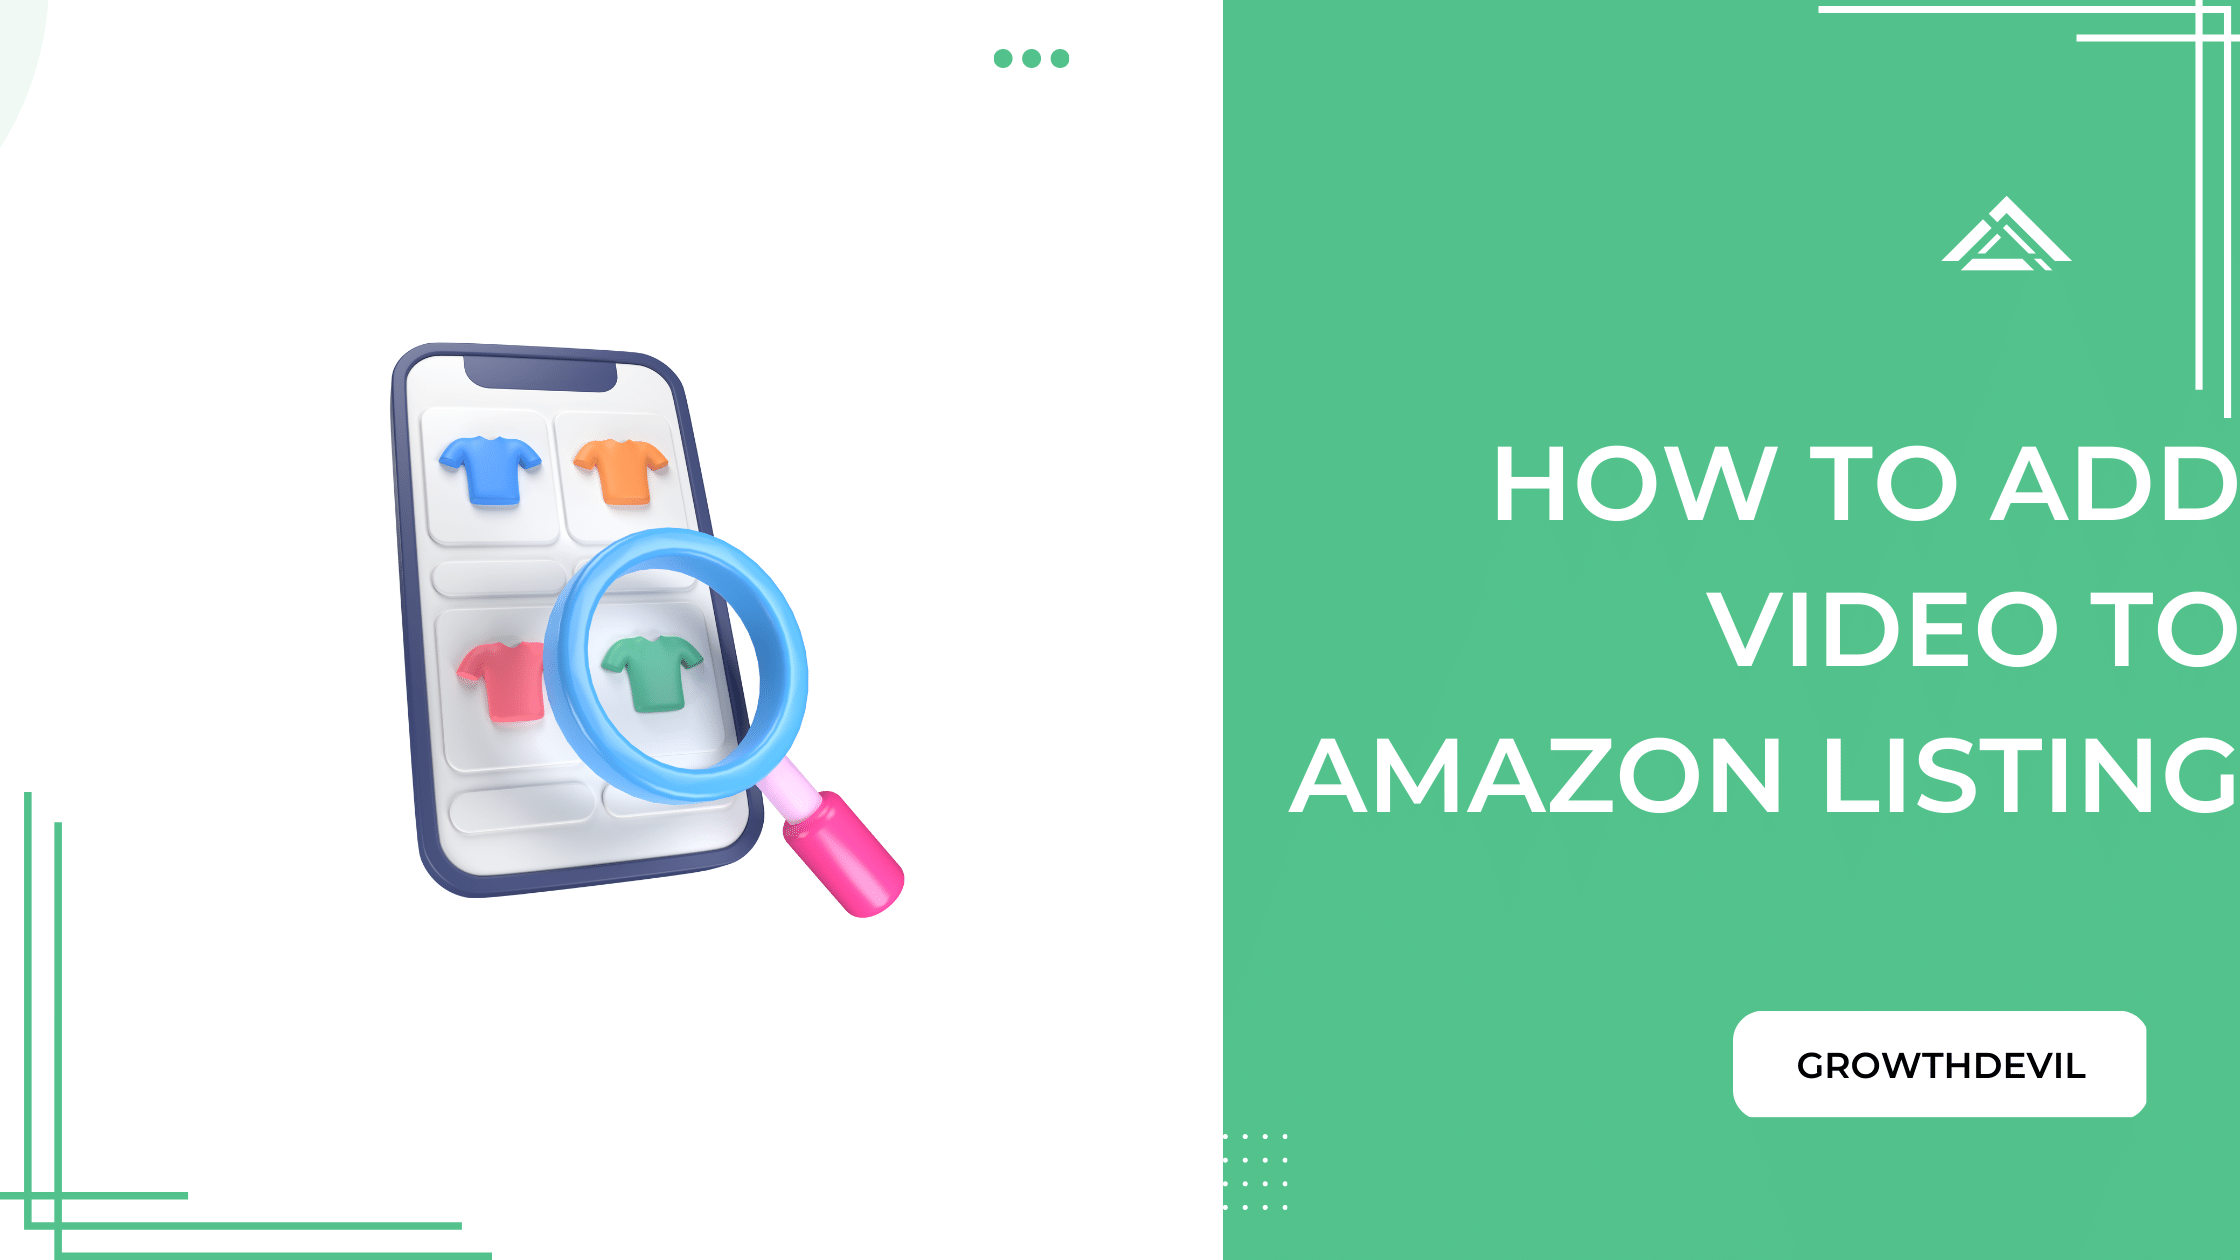 How To Add Video To Amazon Listing - GrowthDevil